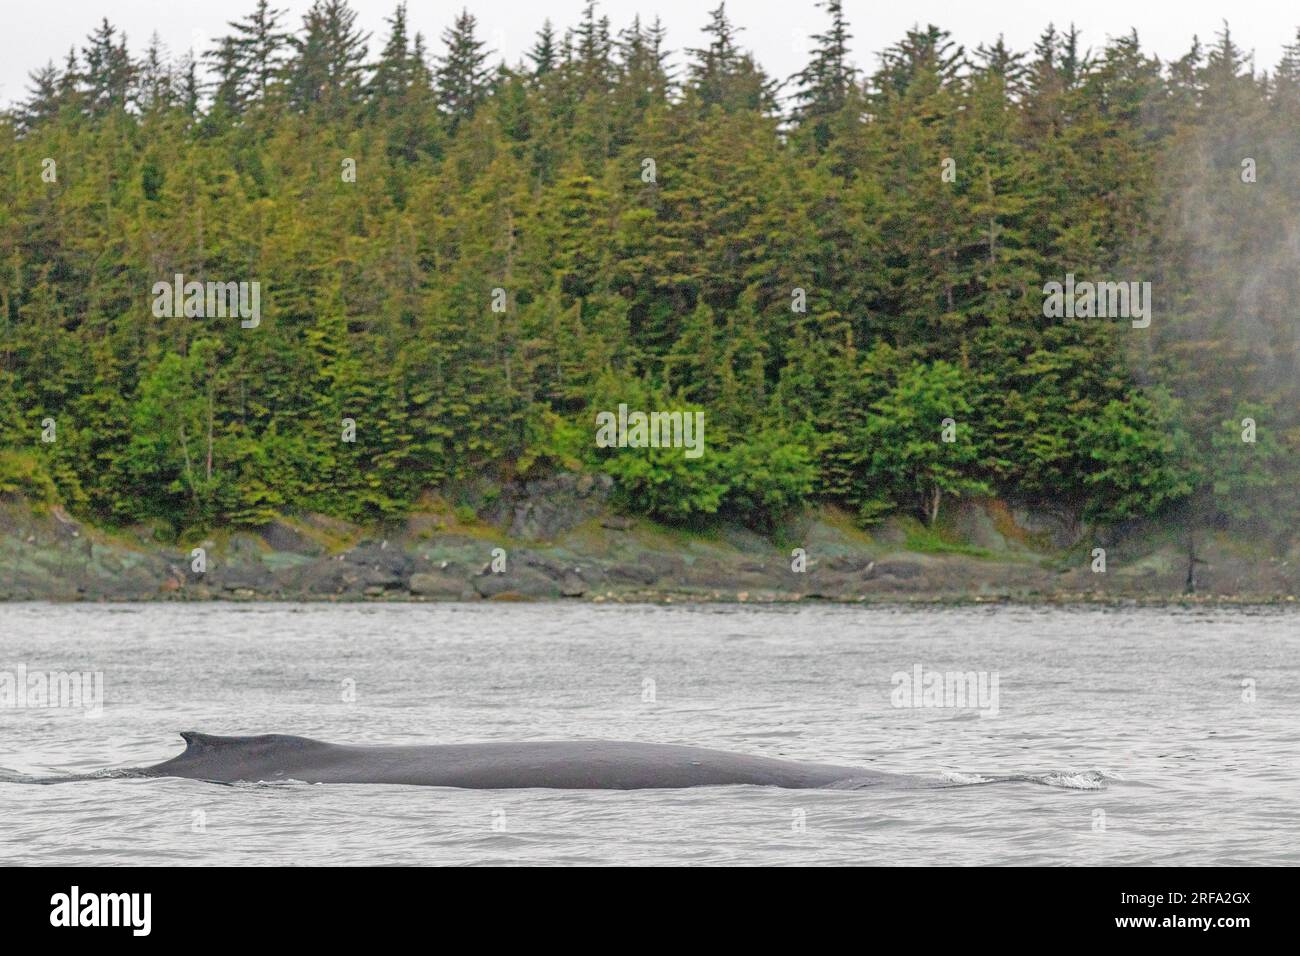 Humpback whale in the waters off Juneau Stock Photo